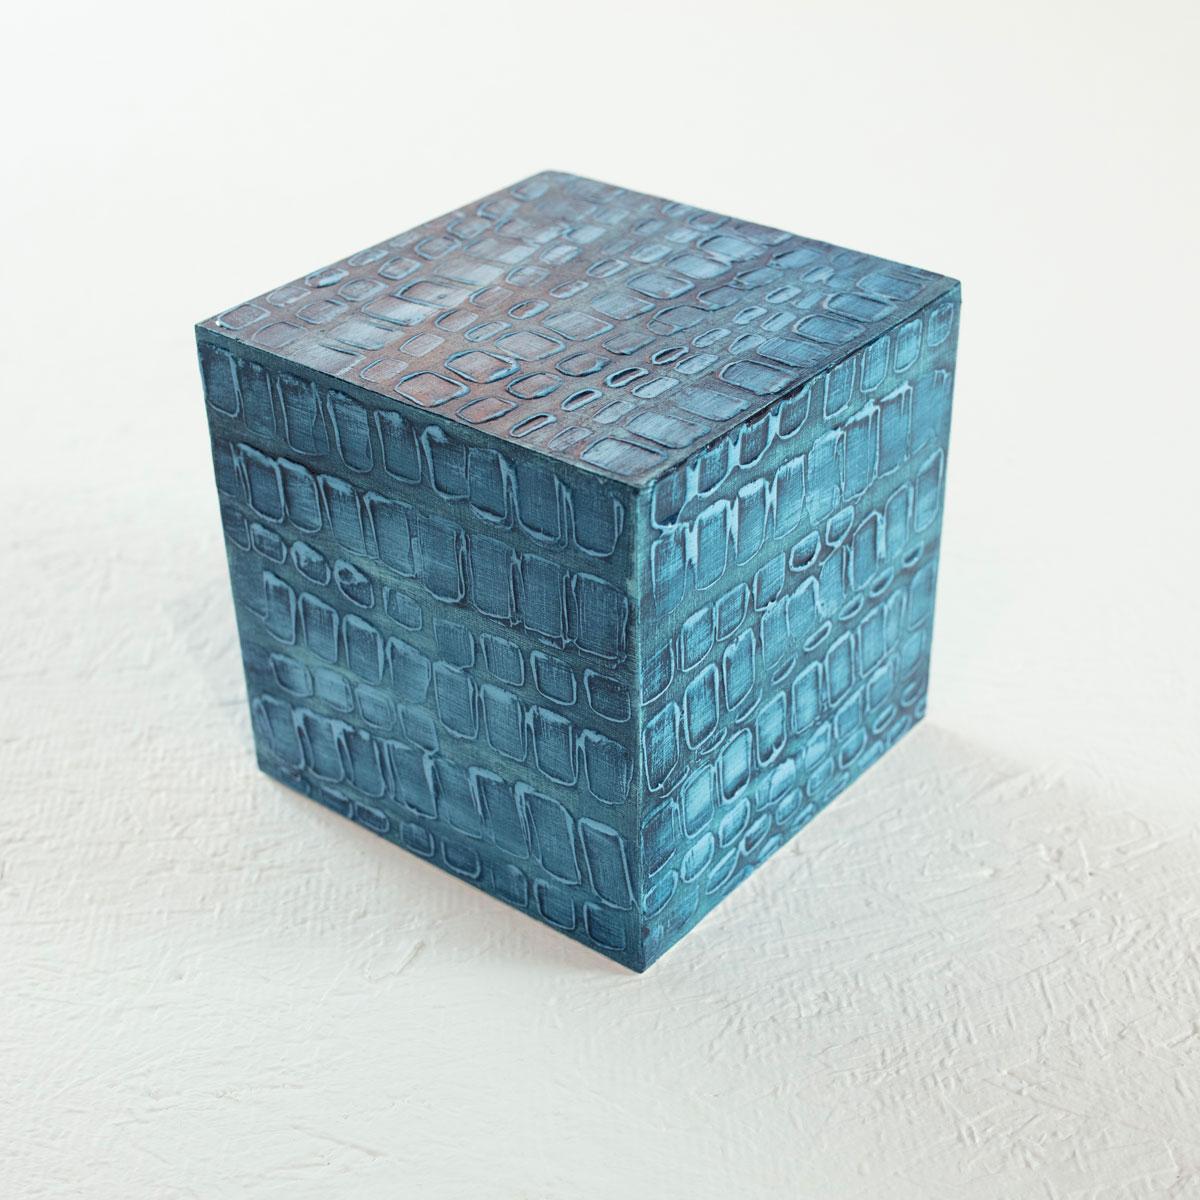 Sofie Swann Abstract Painting - "Little Swann 9" Painted Wooden Cube Sculpture